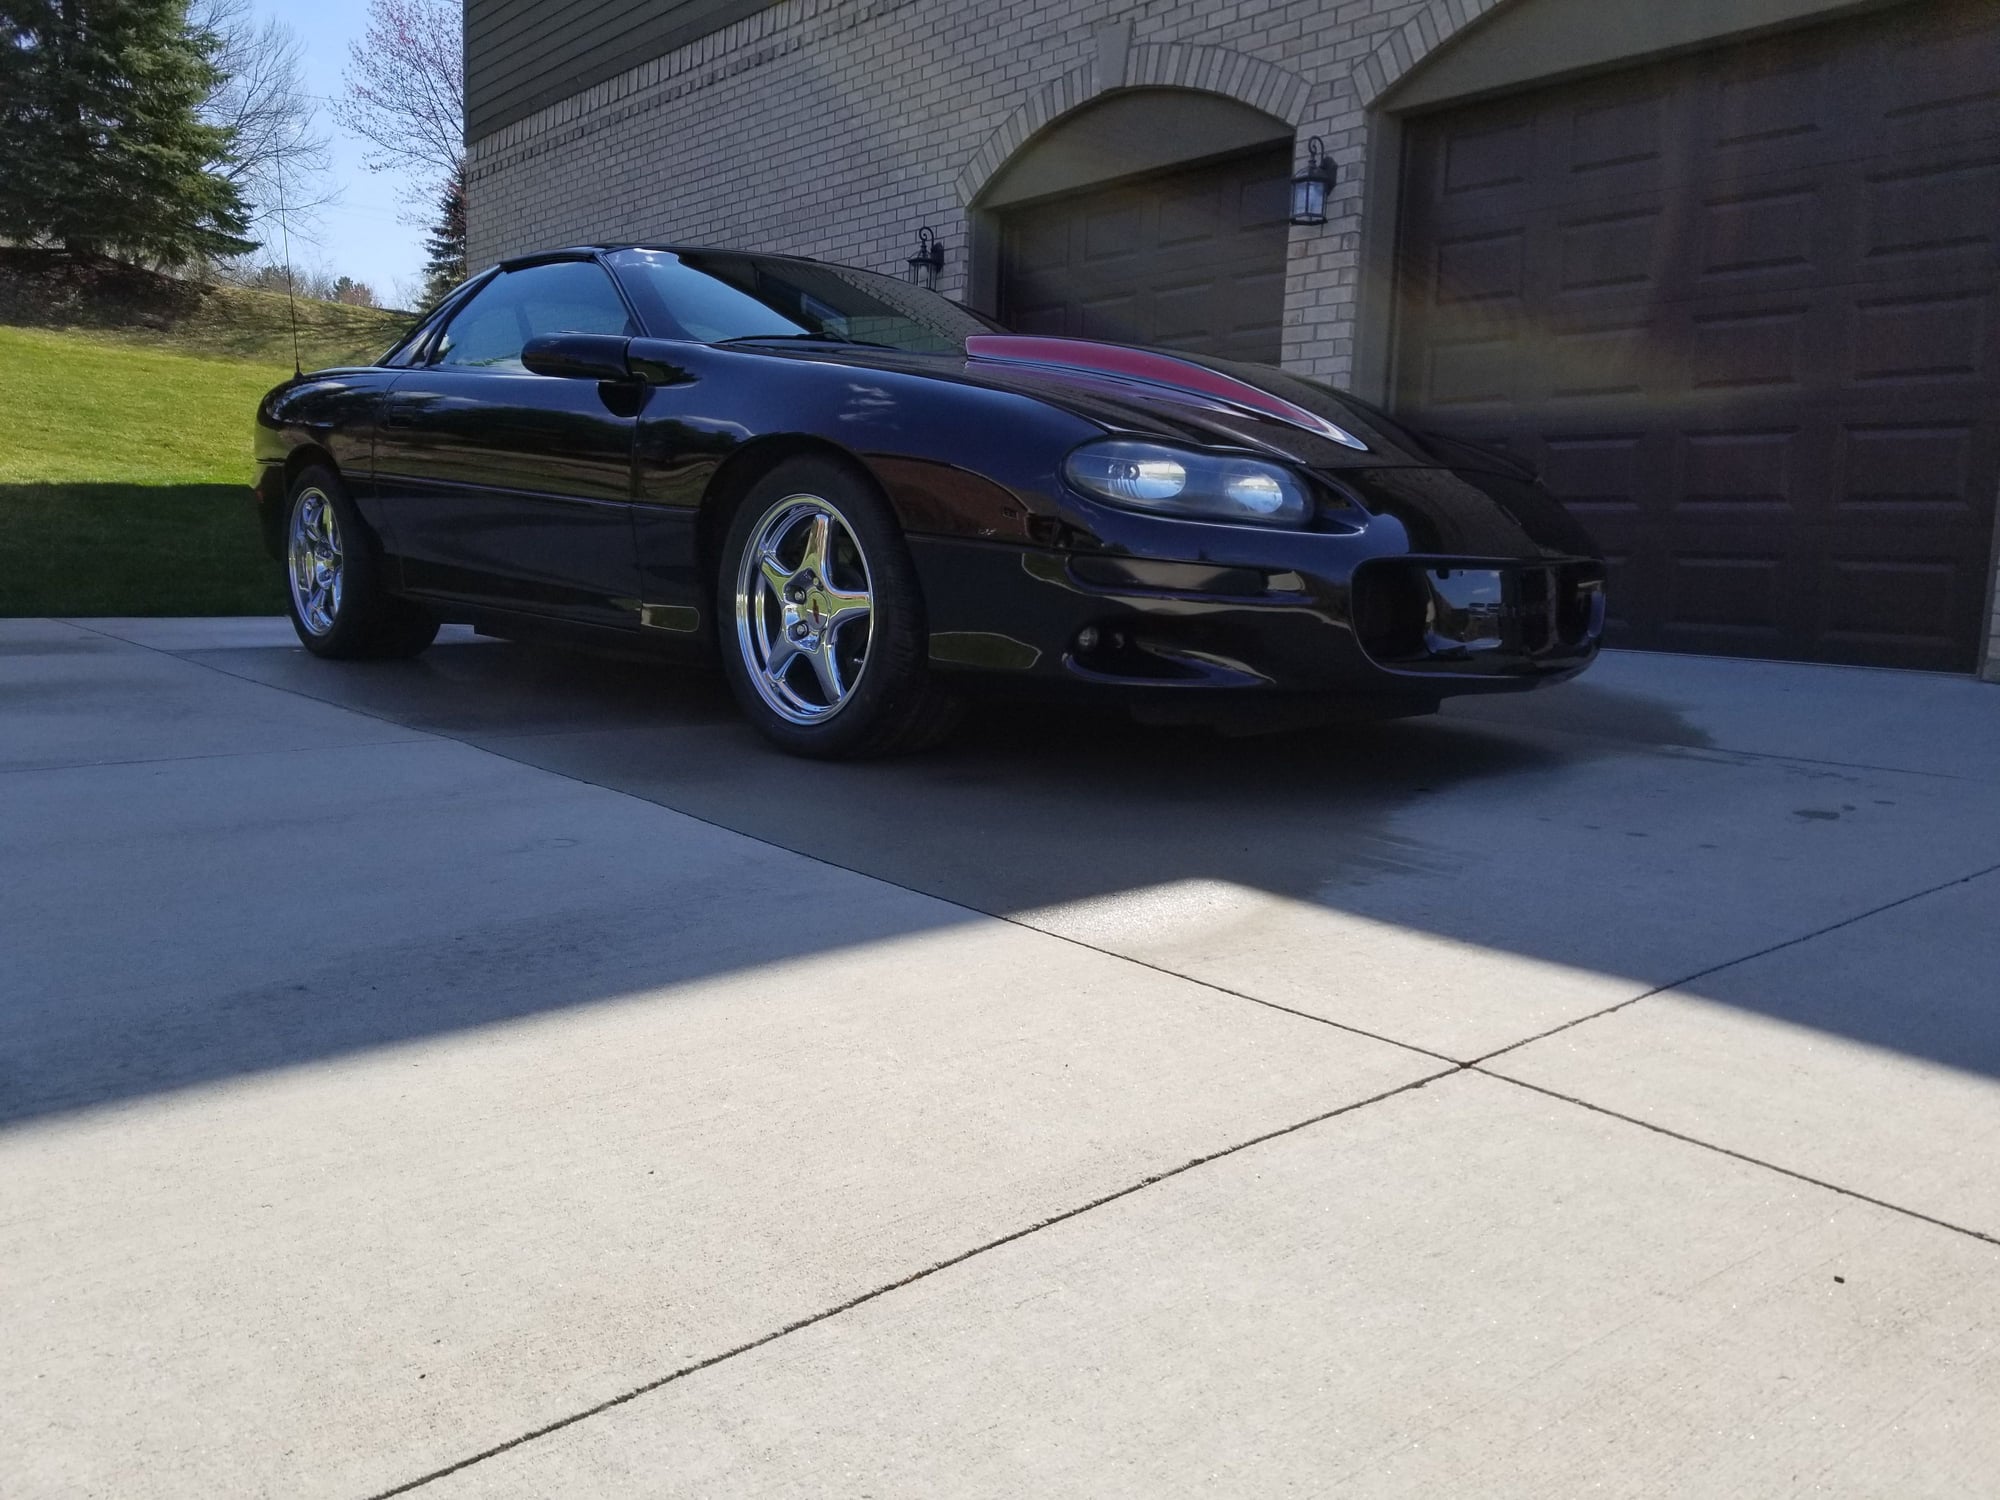 1999 Chevrolet Camaro - 99 Z28 408, 4L80E, 9" Rear, Tons more (Prepped for Twin Turbo) - Used - VIN 2G1FP22GXX2119462 - 49,282 Miles - 8 cyl - 2WD - Automatic - Coupe - Black - Washington, MI 48094, United States